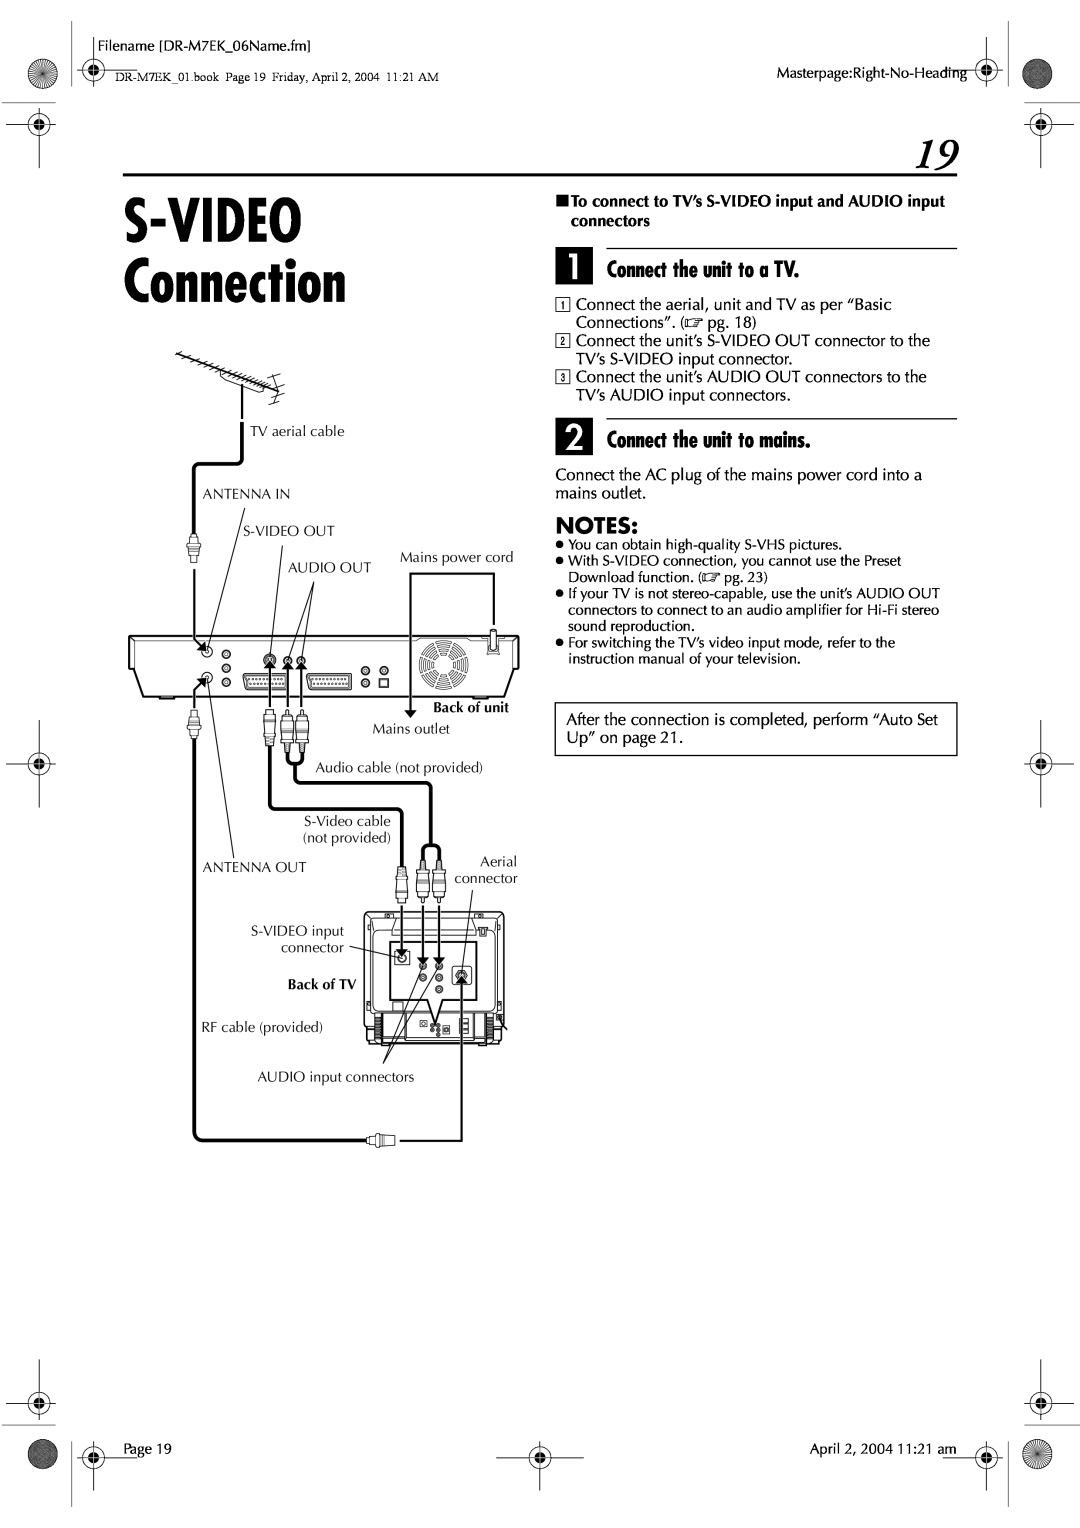 JVC DR-M7S manual S-VIDEO Connection, A Connect the unit to a TV, B Connect the unit to mains, Back of unit, Back of TV 